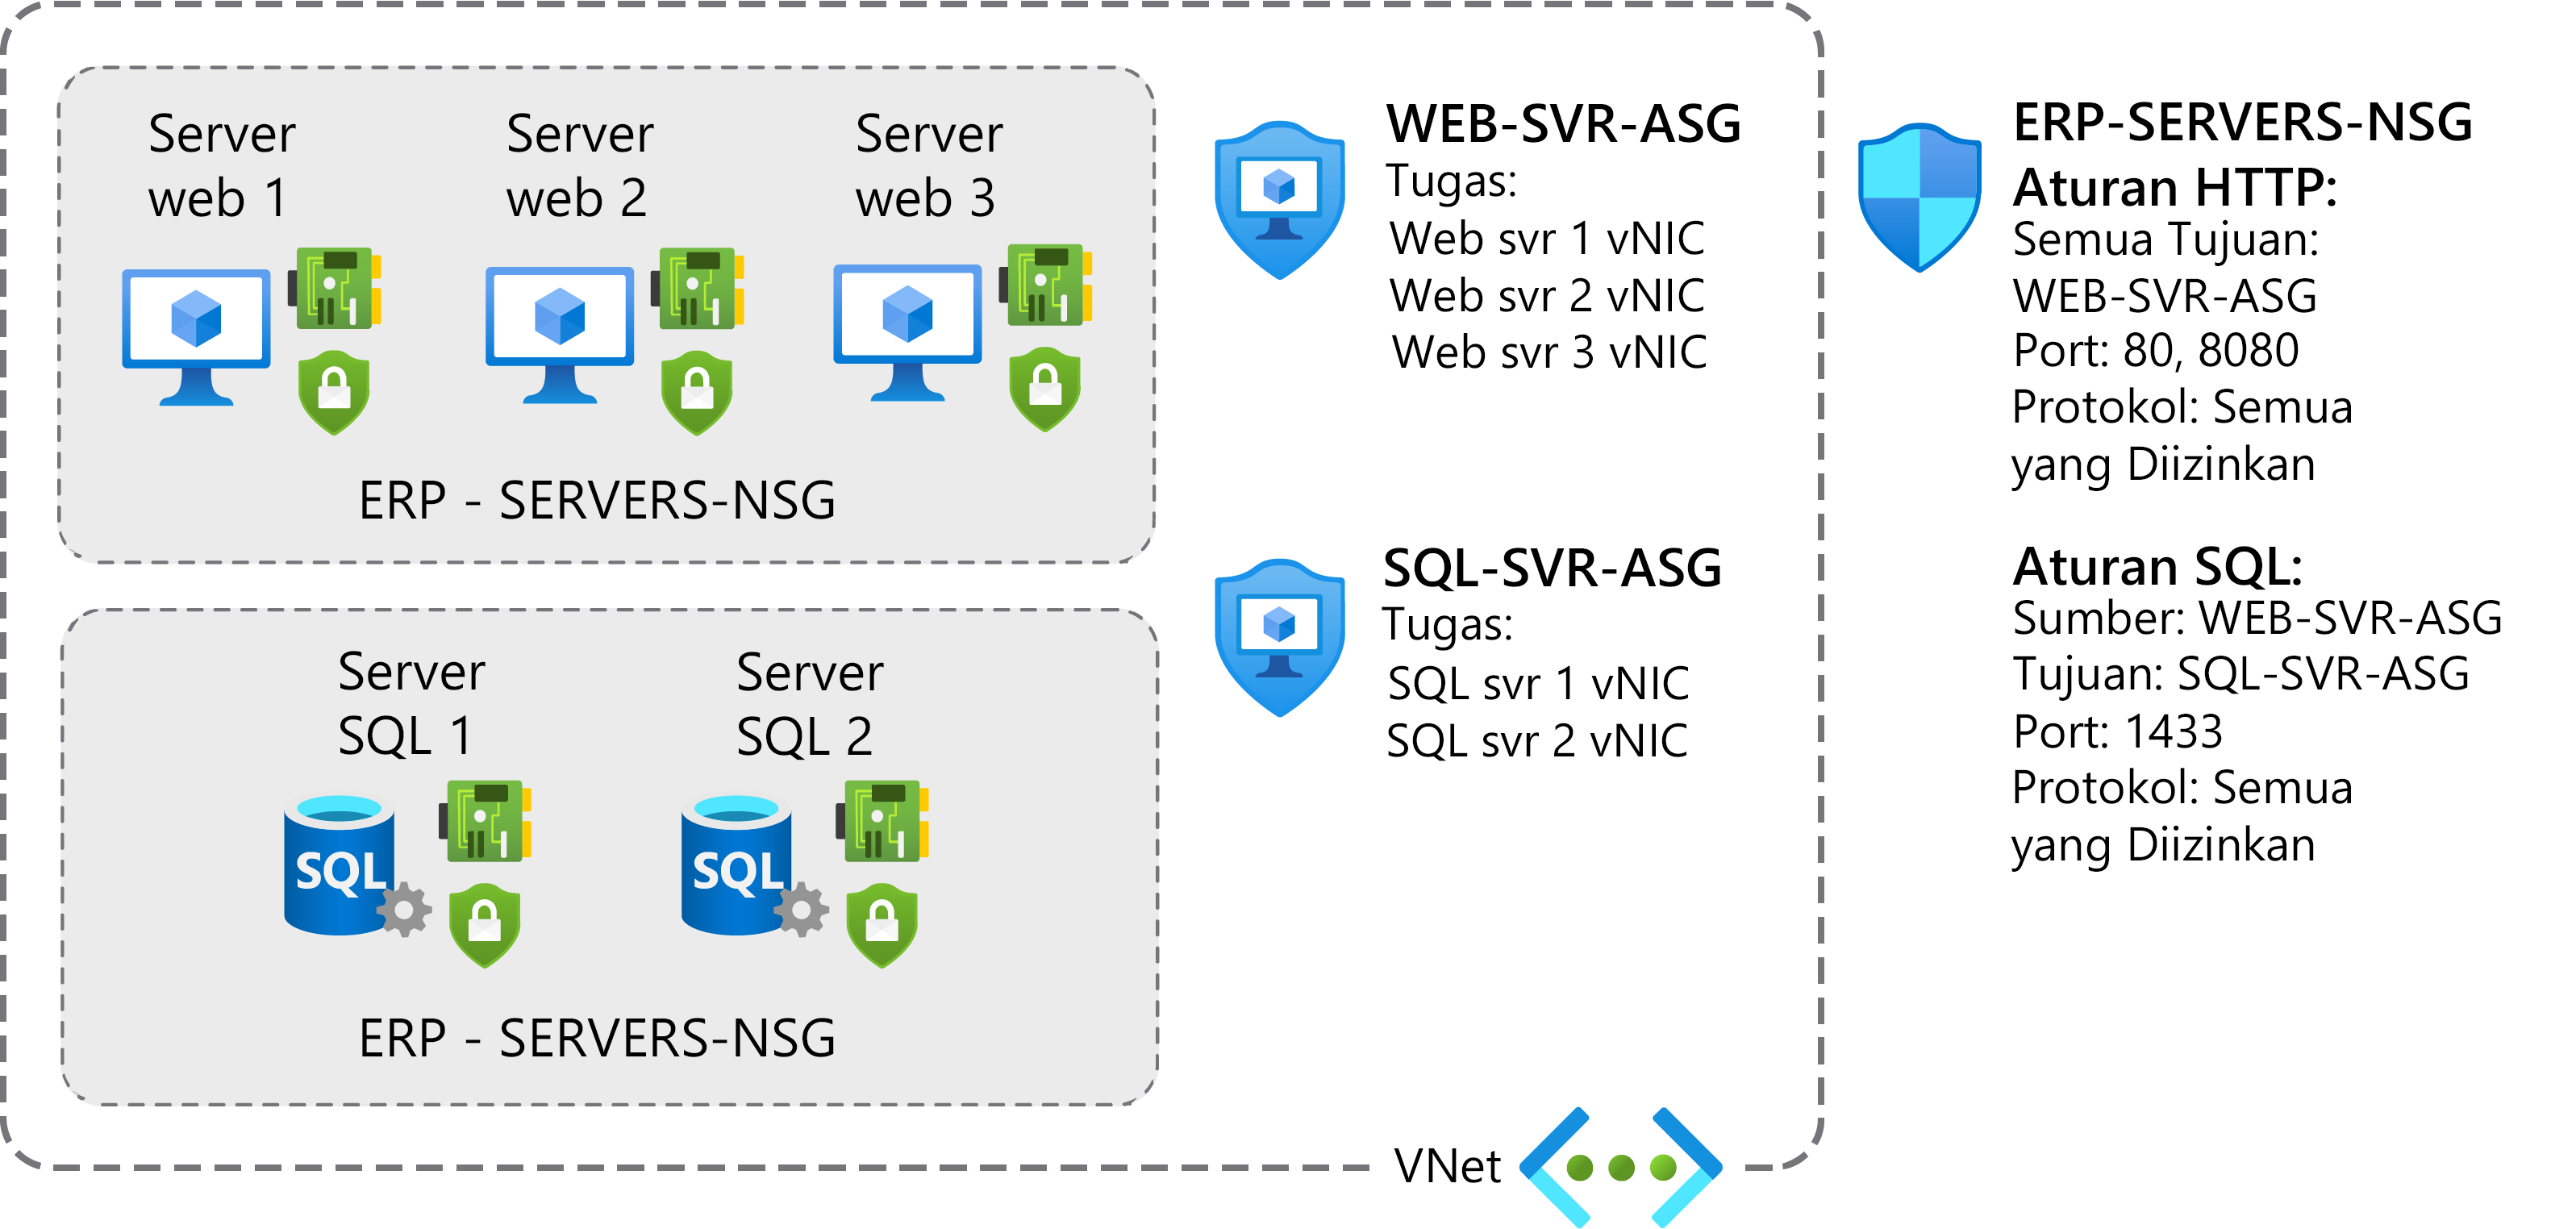 The graphic depicts a collection of web servers is protected by an NSG called ERP - SERVERS-NSG, as is a collection of SQL servers. This NSG has two rules: one which filters web traffic to port 80 and 8080, and a second that filters SQL traffic on port 1433. The web servers are protected by an ASG called WEB-SVR-ASG assigned to their NICs. The SQL servers are protected by an ASG called SQL-SVR-ASG which is assigned to their NICs. All resources are connected to the same VNet.